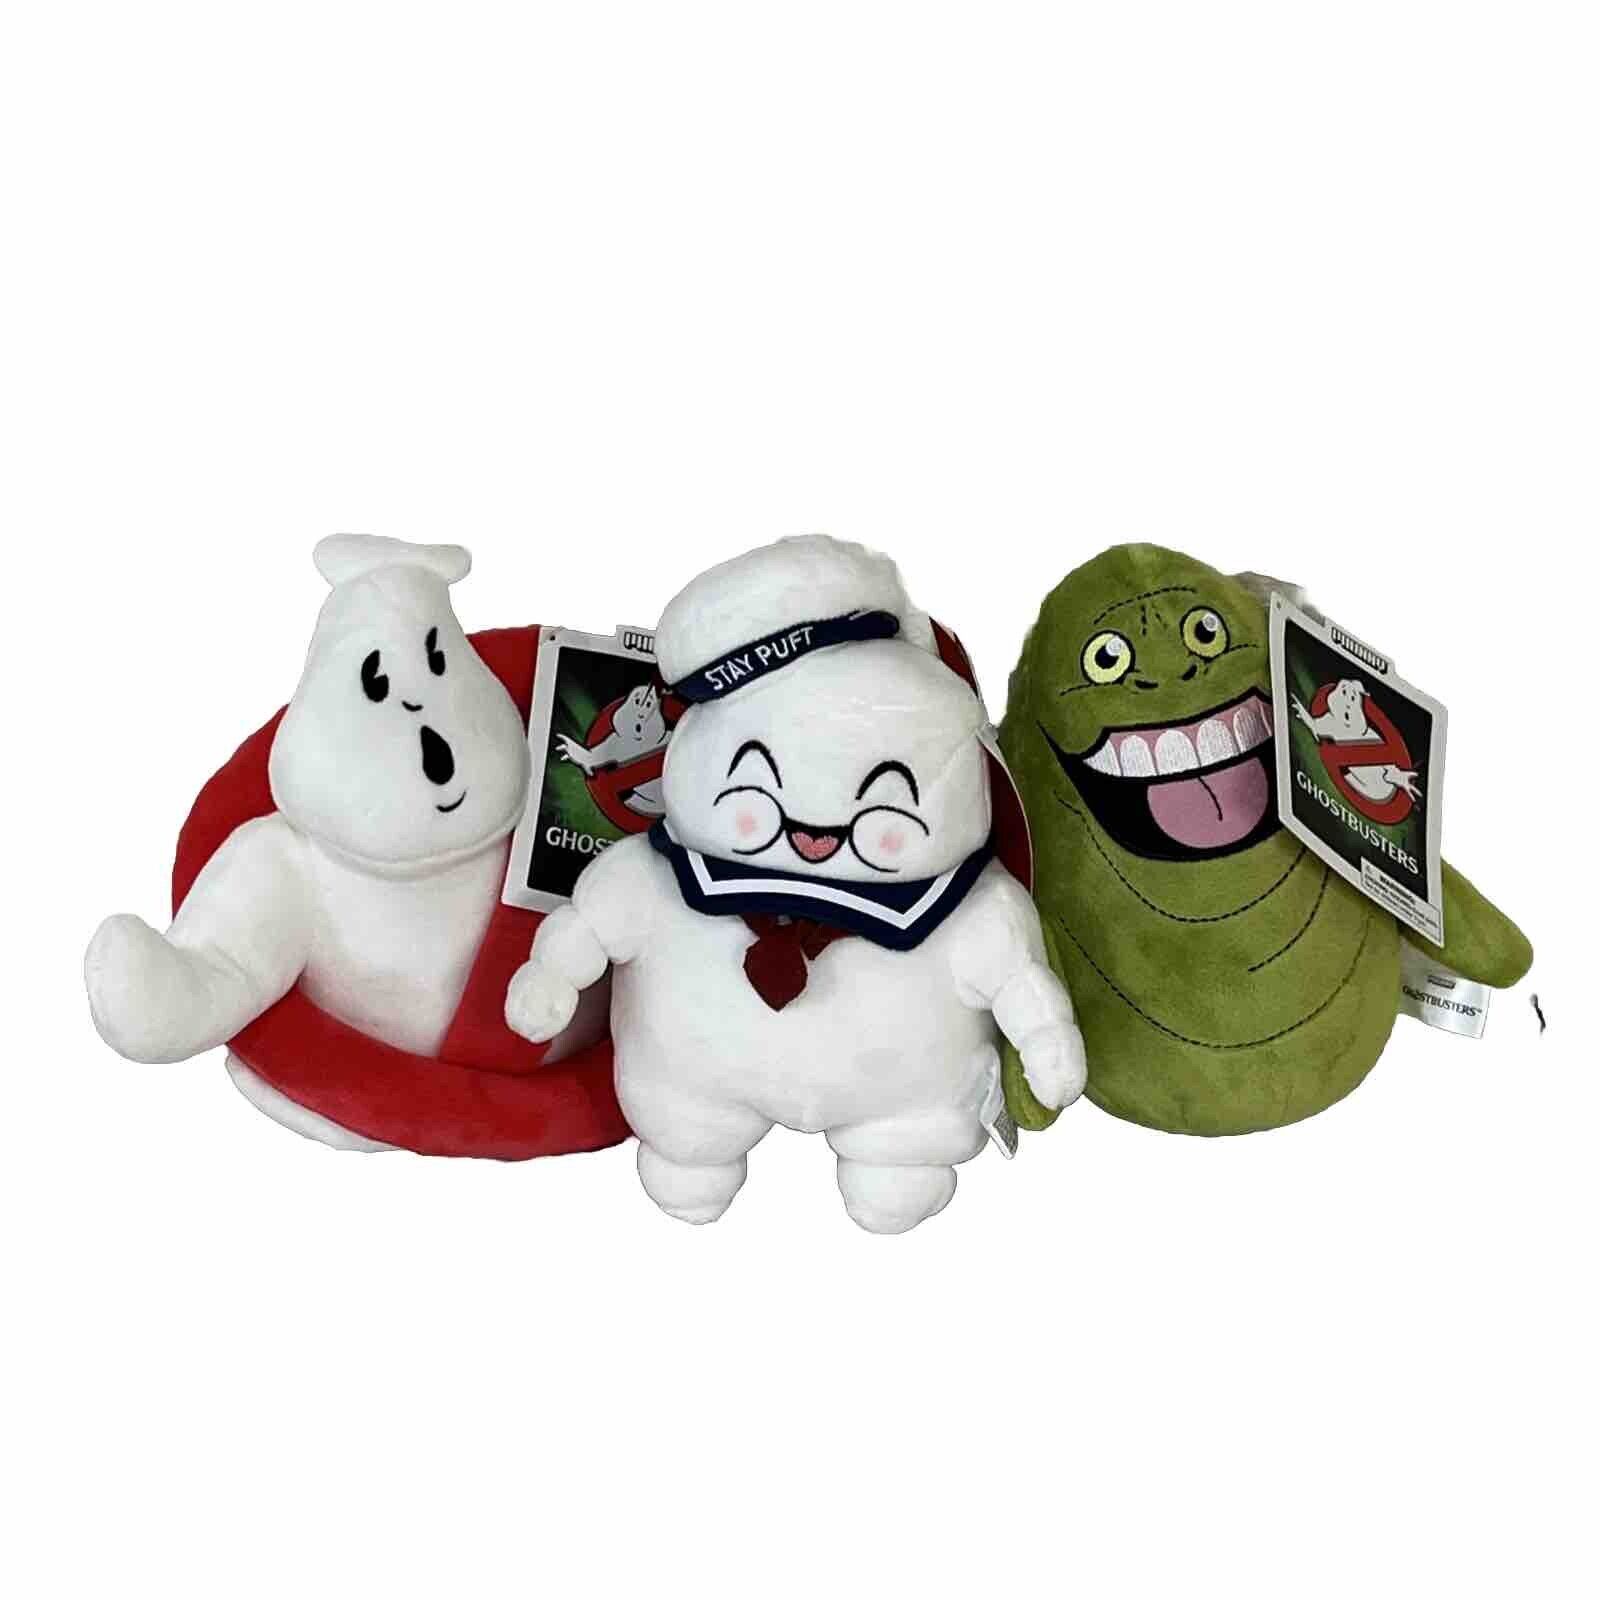 Lot of 3 Ghostbusters Plush Toys Slimer & Stay Puft Marshmallow Man Kidrobot